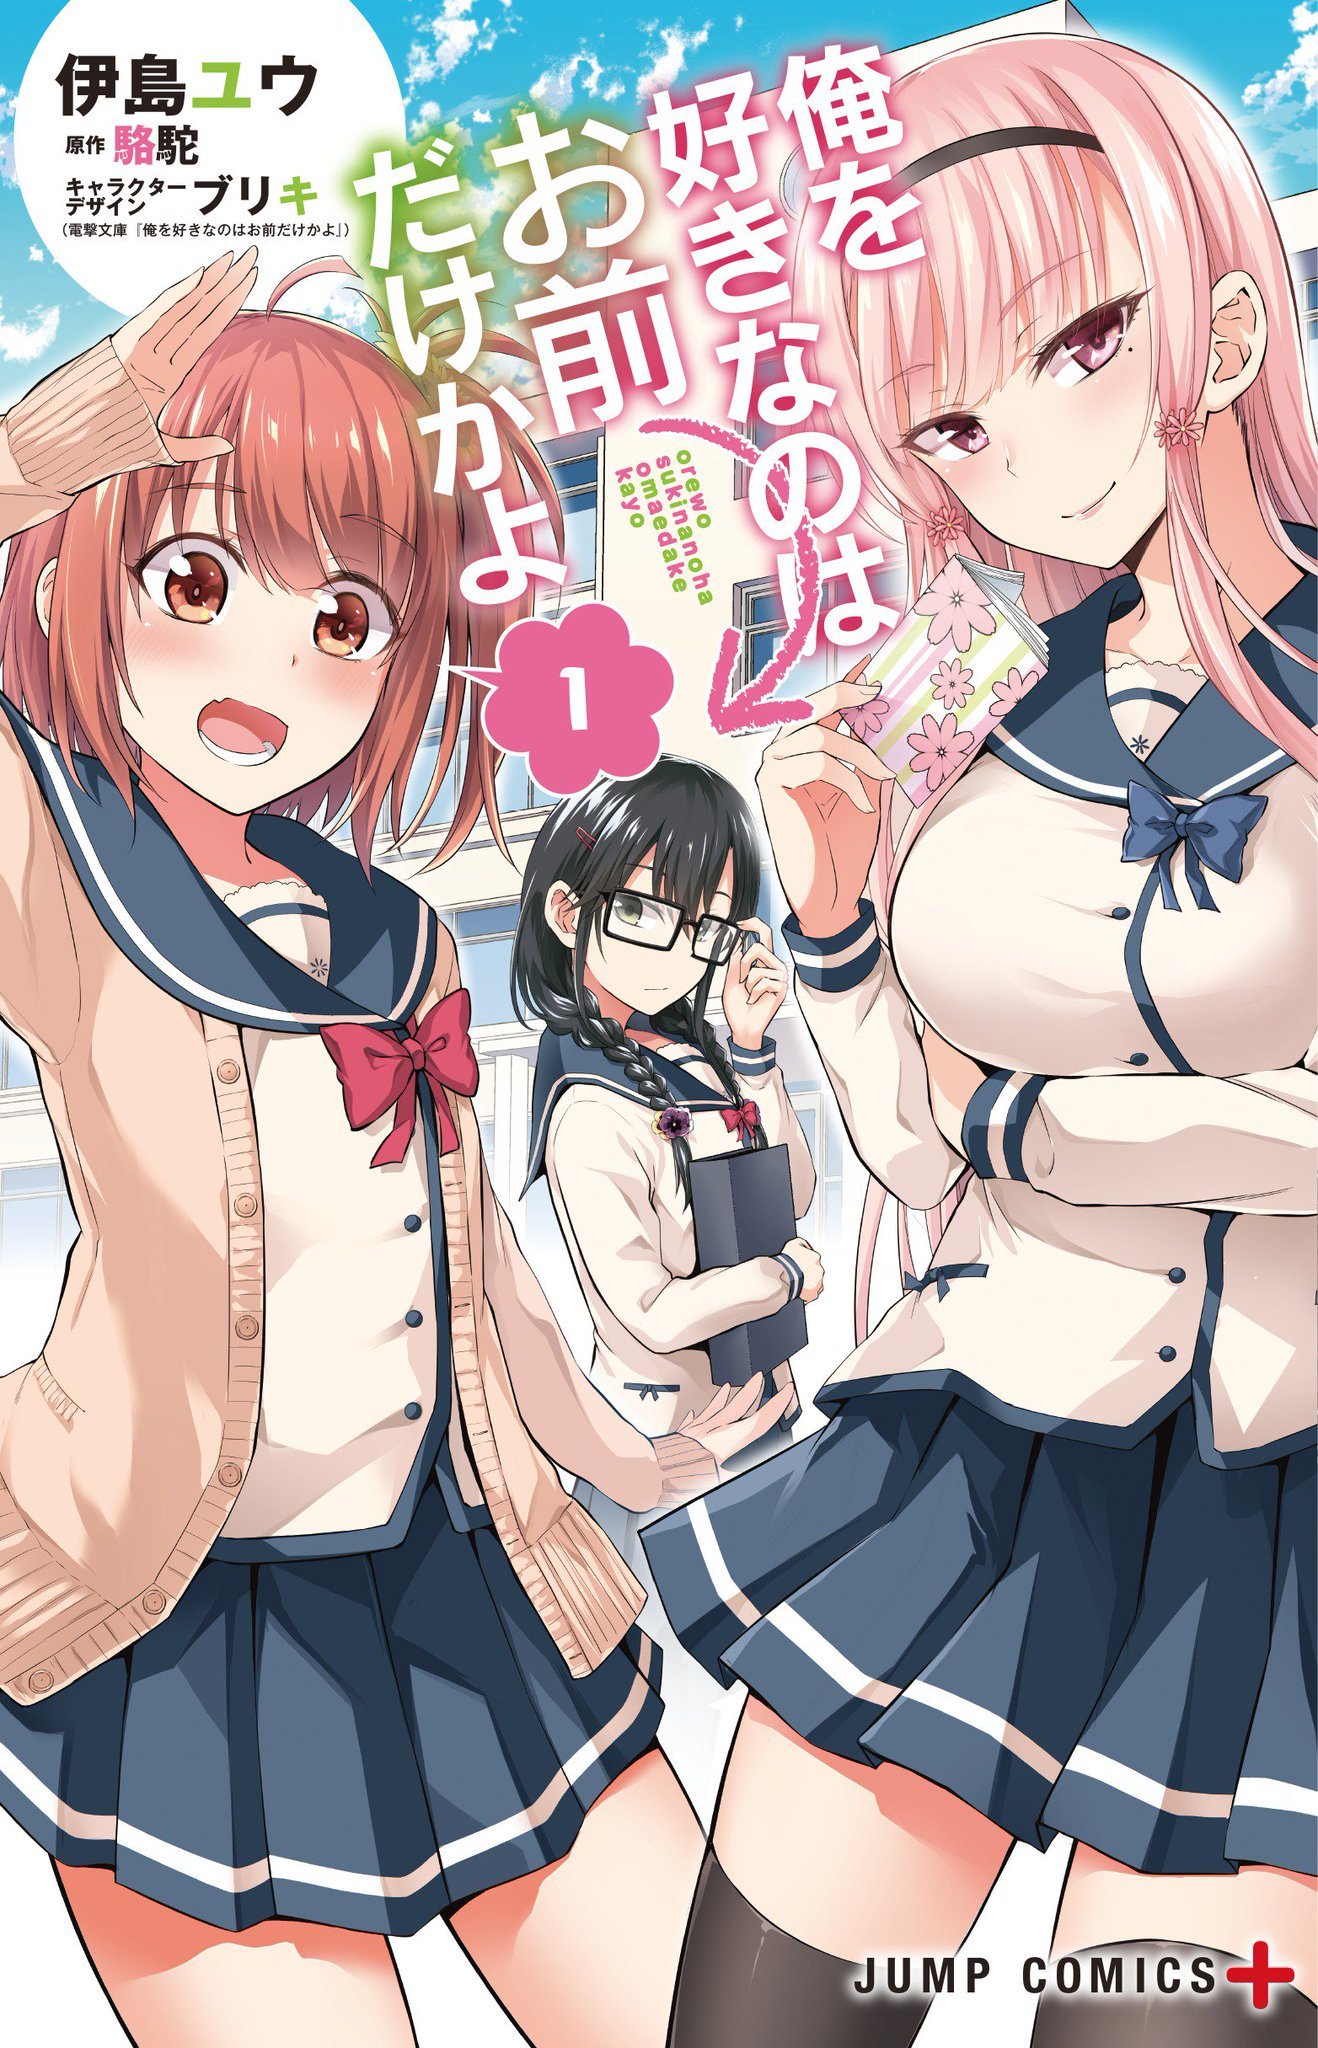 Oresuki: Are You the Only One Who Loves Me? Vol. 4 - Tokyo Otaku Mode (TOM)